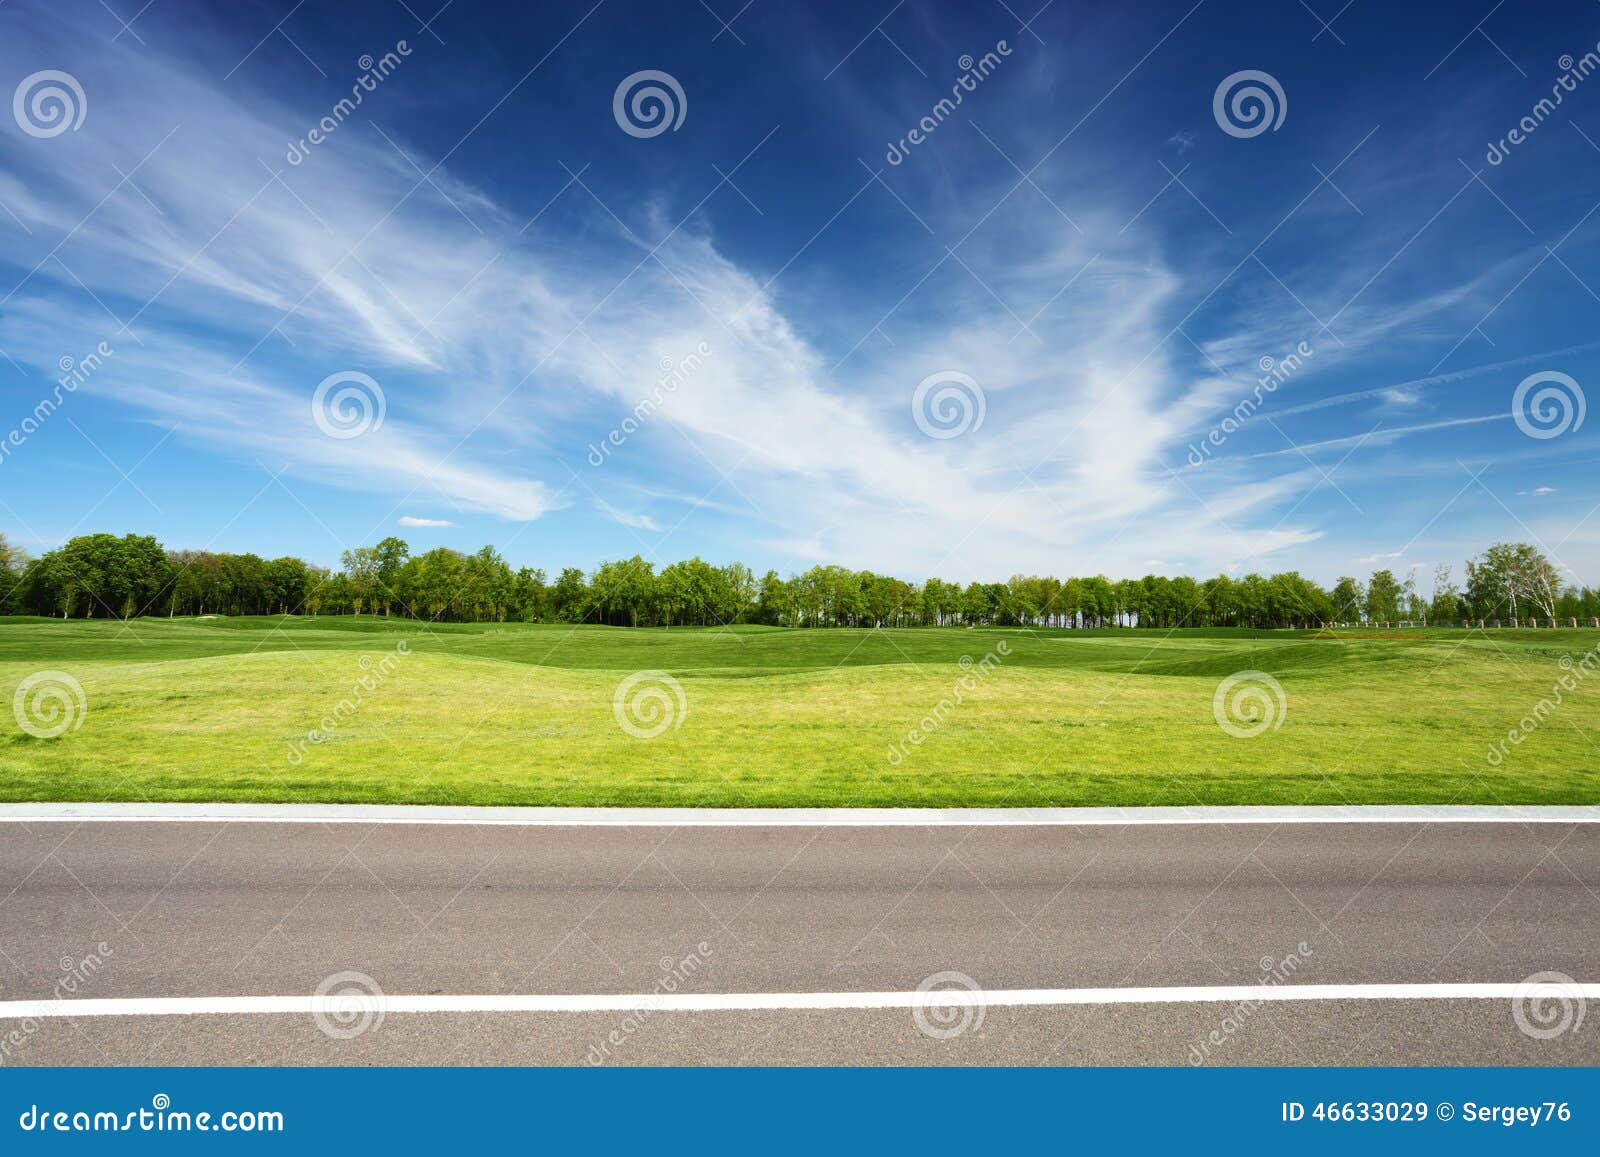 green meadow with trees and asphalt road